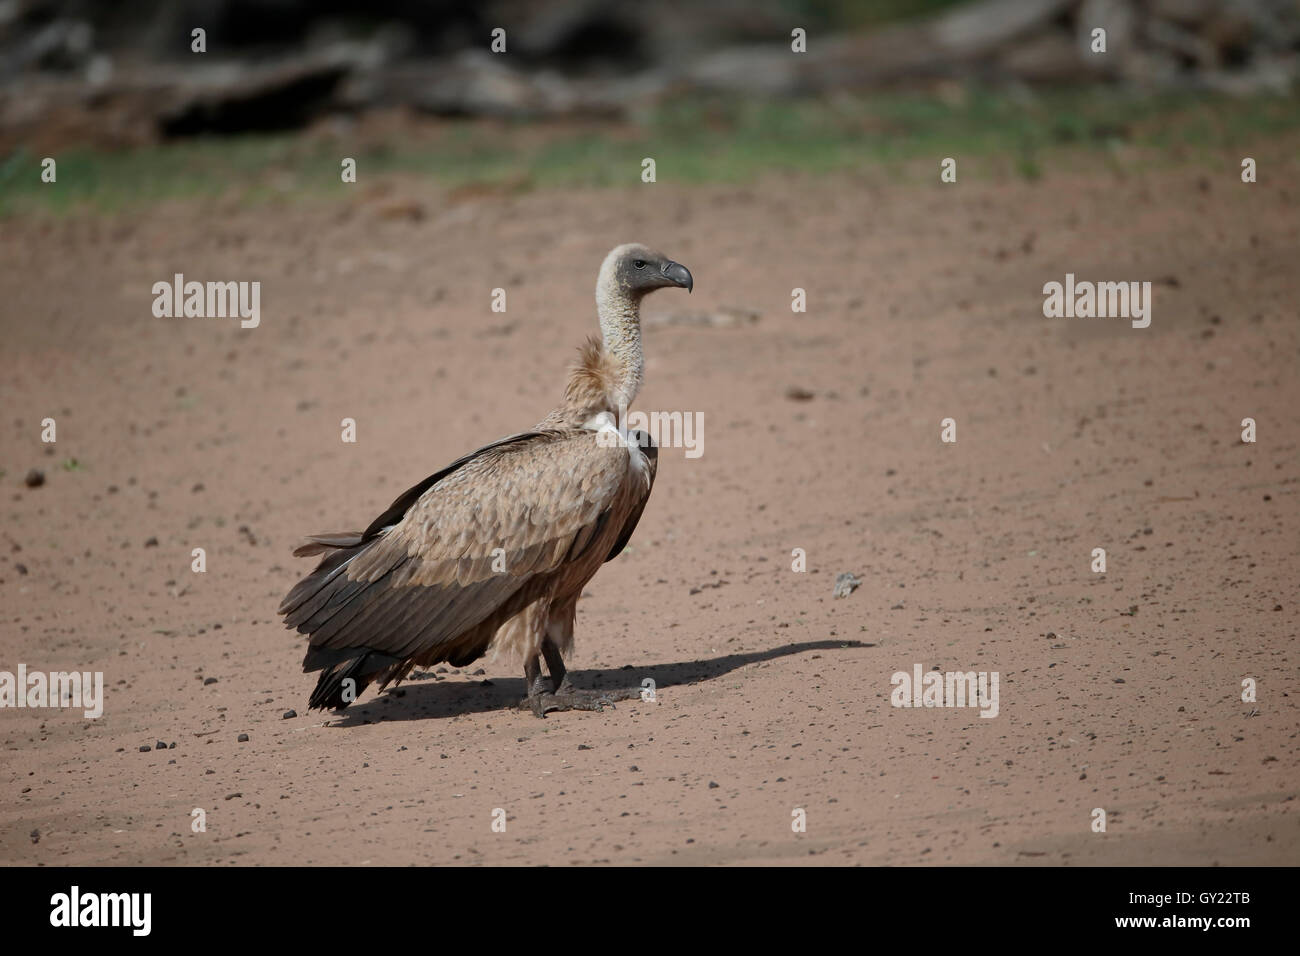 African white-backed vulture, Gyps africanus, singolo uccello sul pavimento, Sud Africa, Agosto 2016 Foto Stock